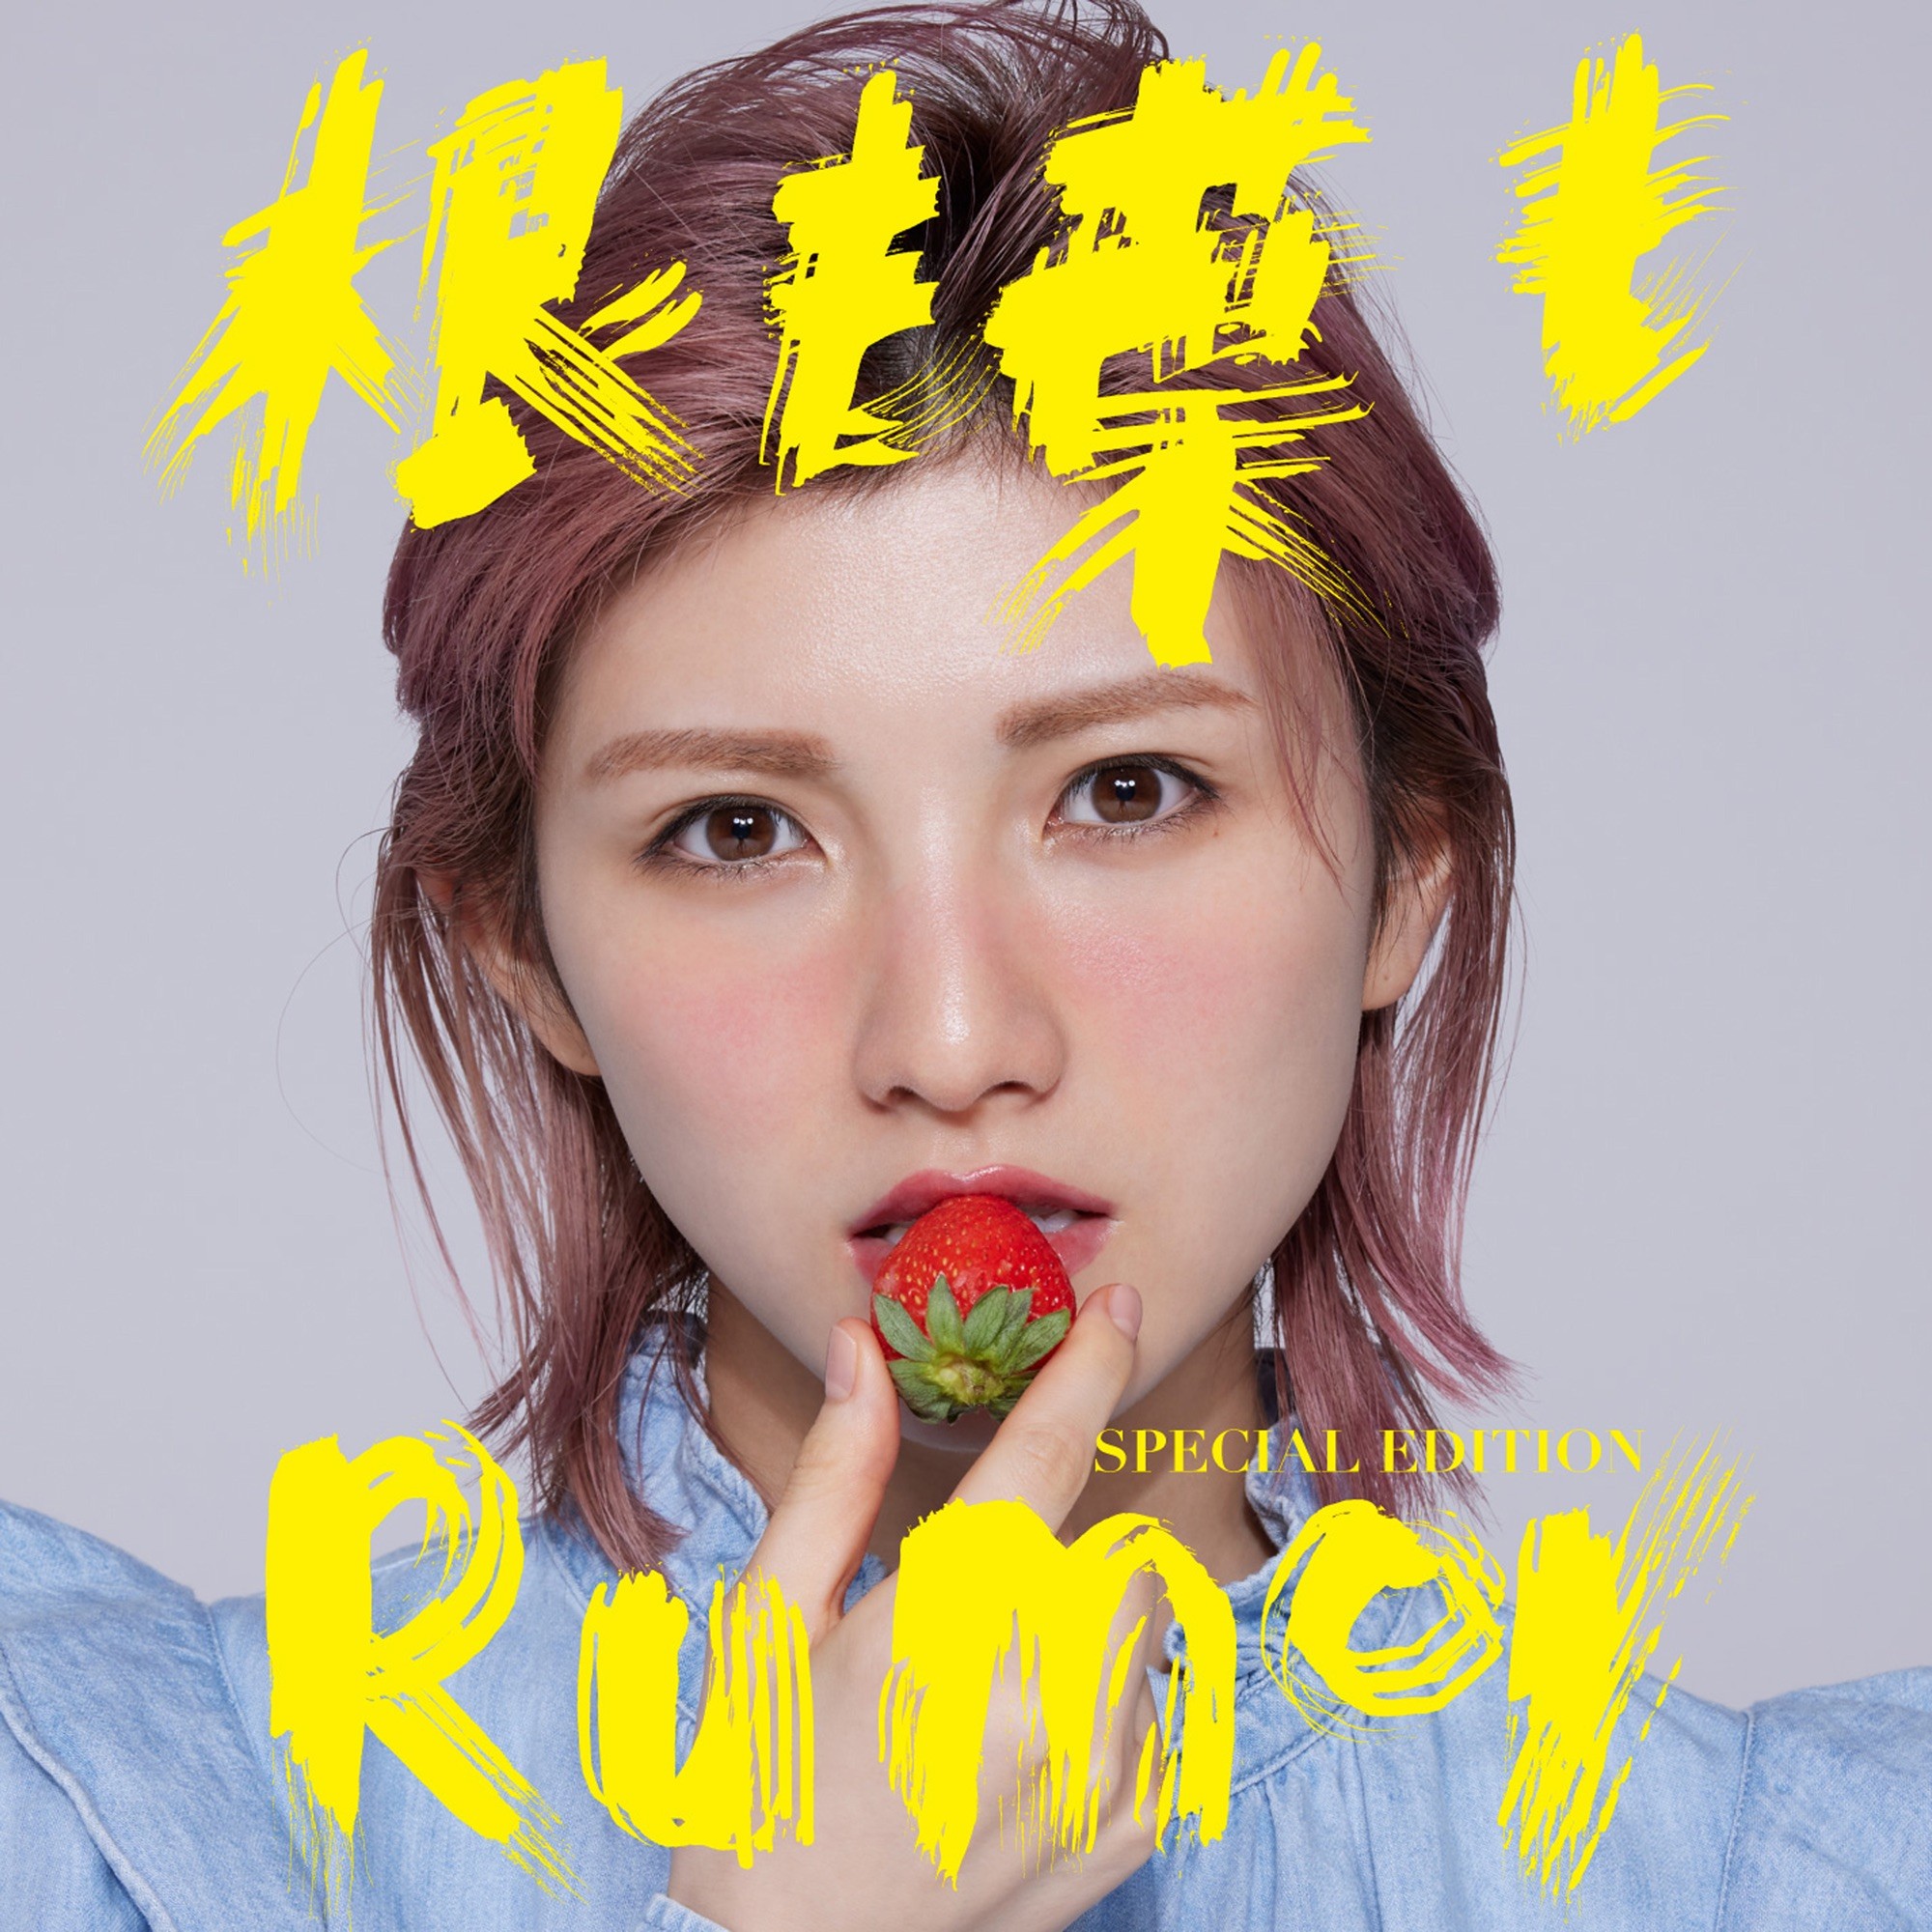 AKB48 – 根も葉もRumor (Special Edition) [24bit Lossless + MP3 320 / WEB] [2021.09.29]